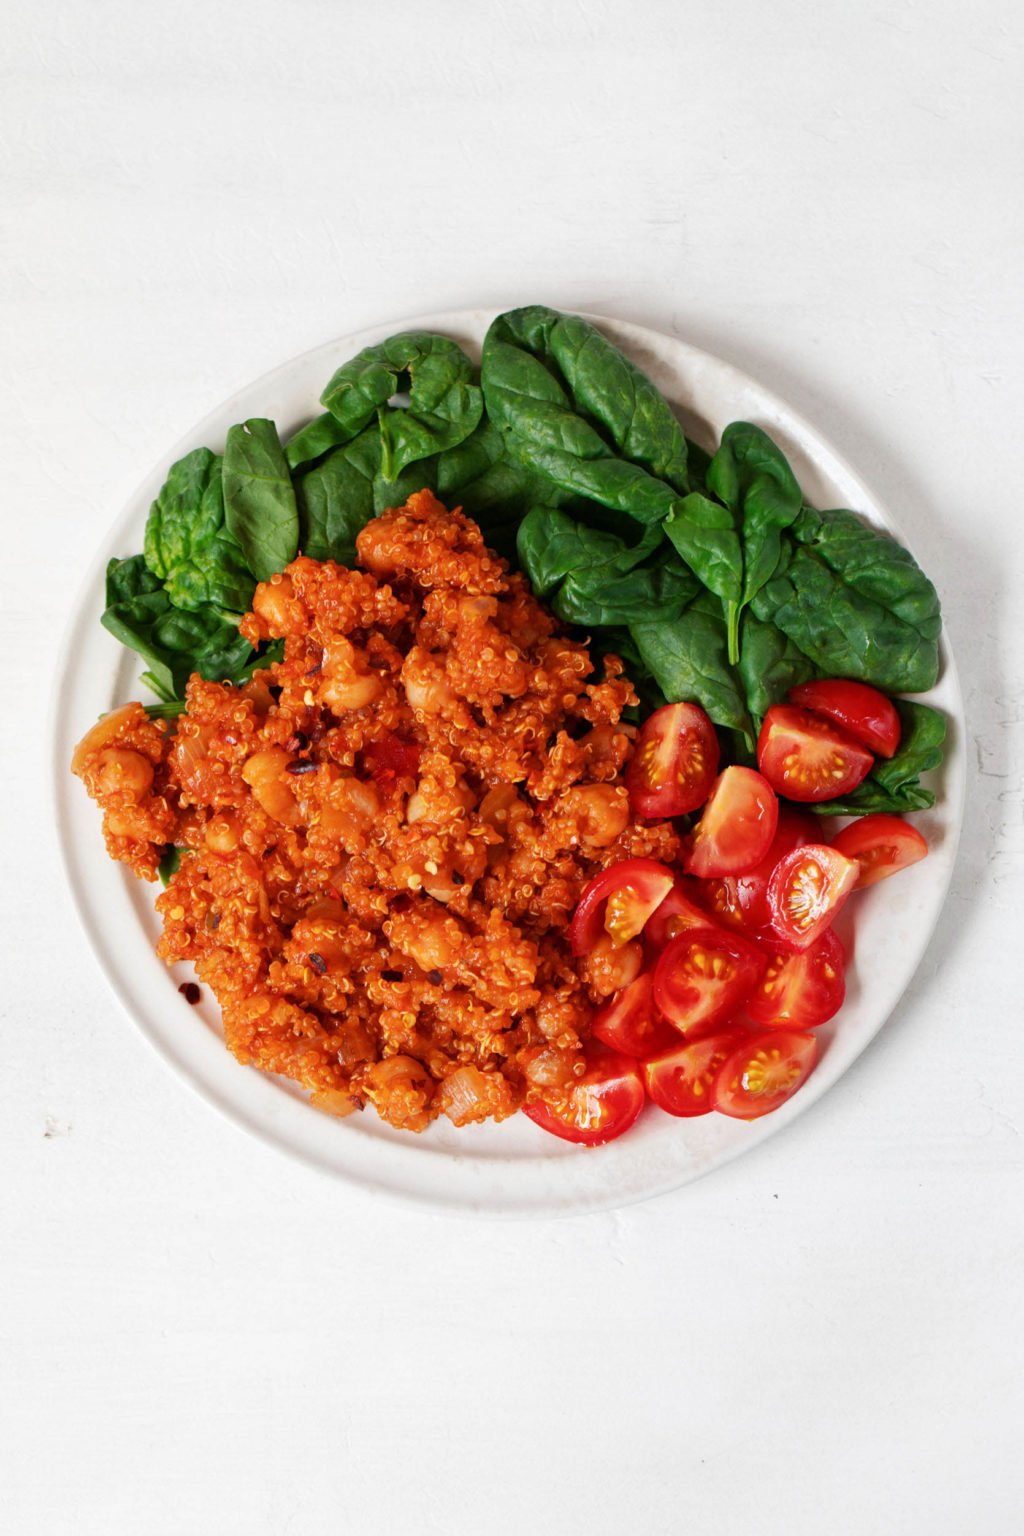 A round, white plate has been topped with grape tomatoes, baby spinach, and quinoa that has been seasoned with tomato.